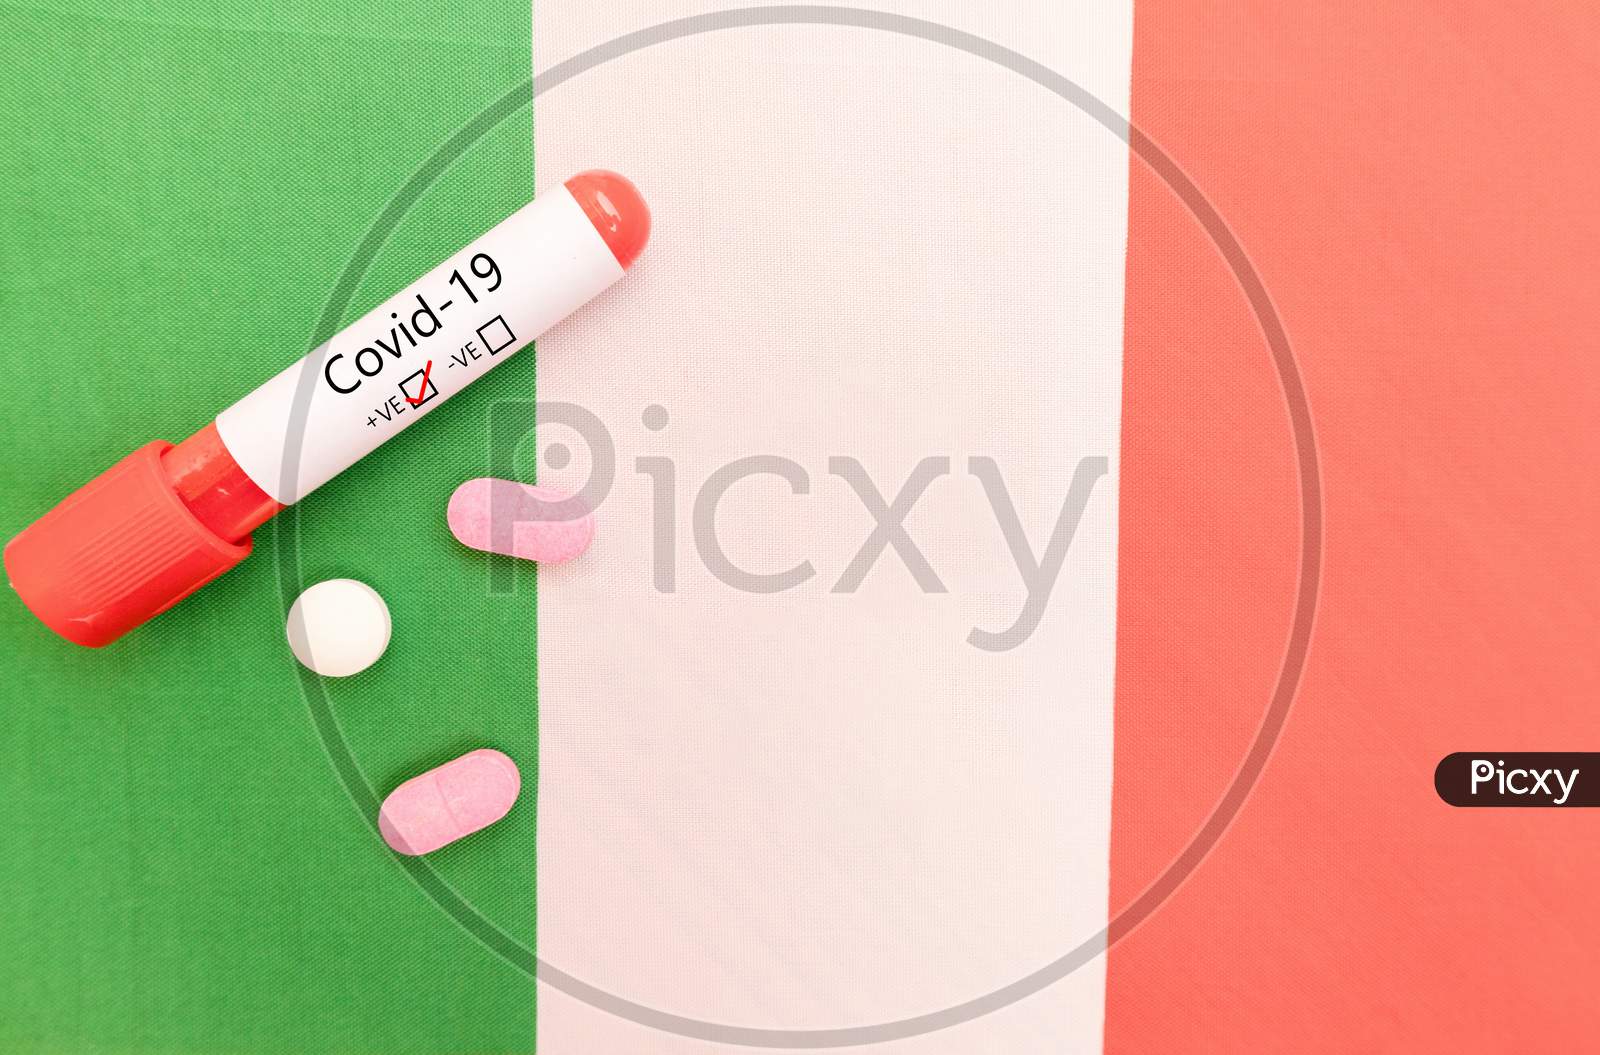 Cocept Of Novel Coronavirus Spread From China To Italy - 2019-Ncov Covid-19 Disease Positive Test At Italy Showing With Blood Sample And Flag.